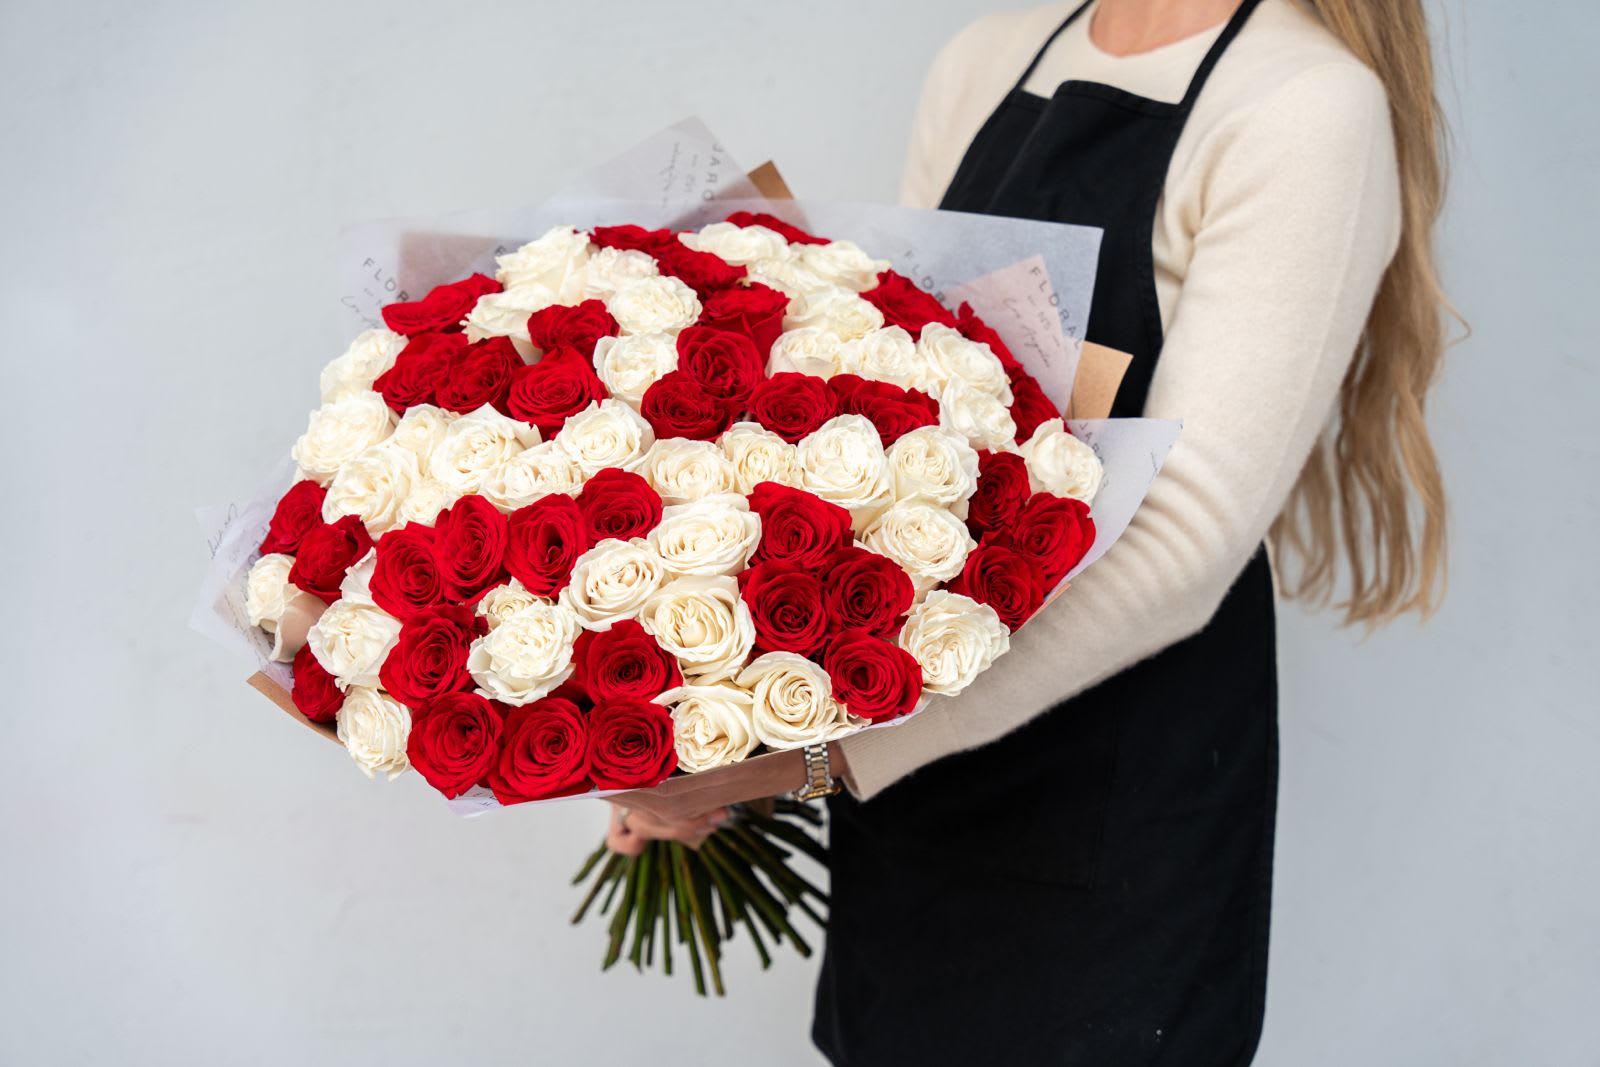 NO. 359 - 75 Red and White Roses - 75 white and red roses Standard size - 75  roses (pictured) Deluxe size - 100 roses Premium size - 125 roses